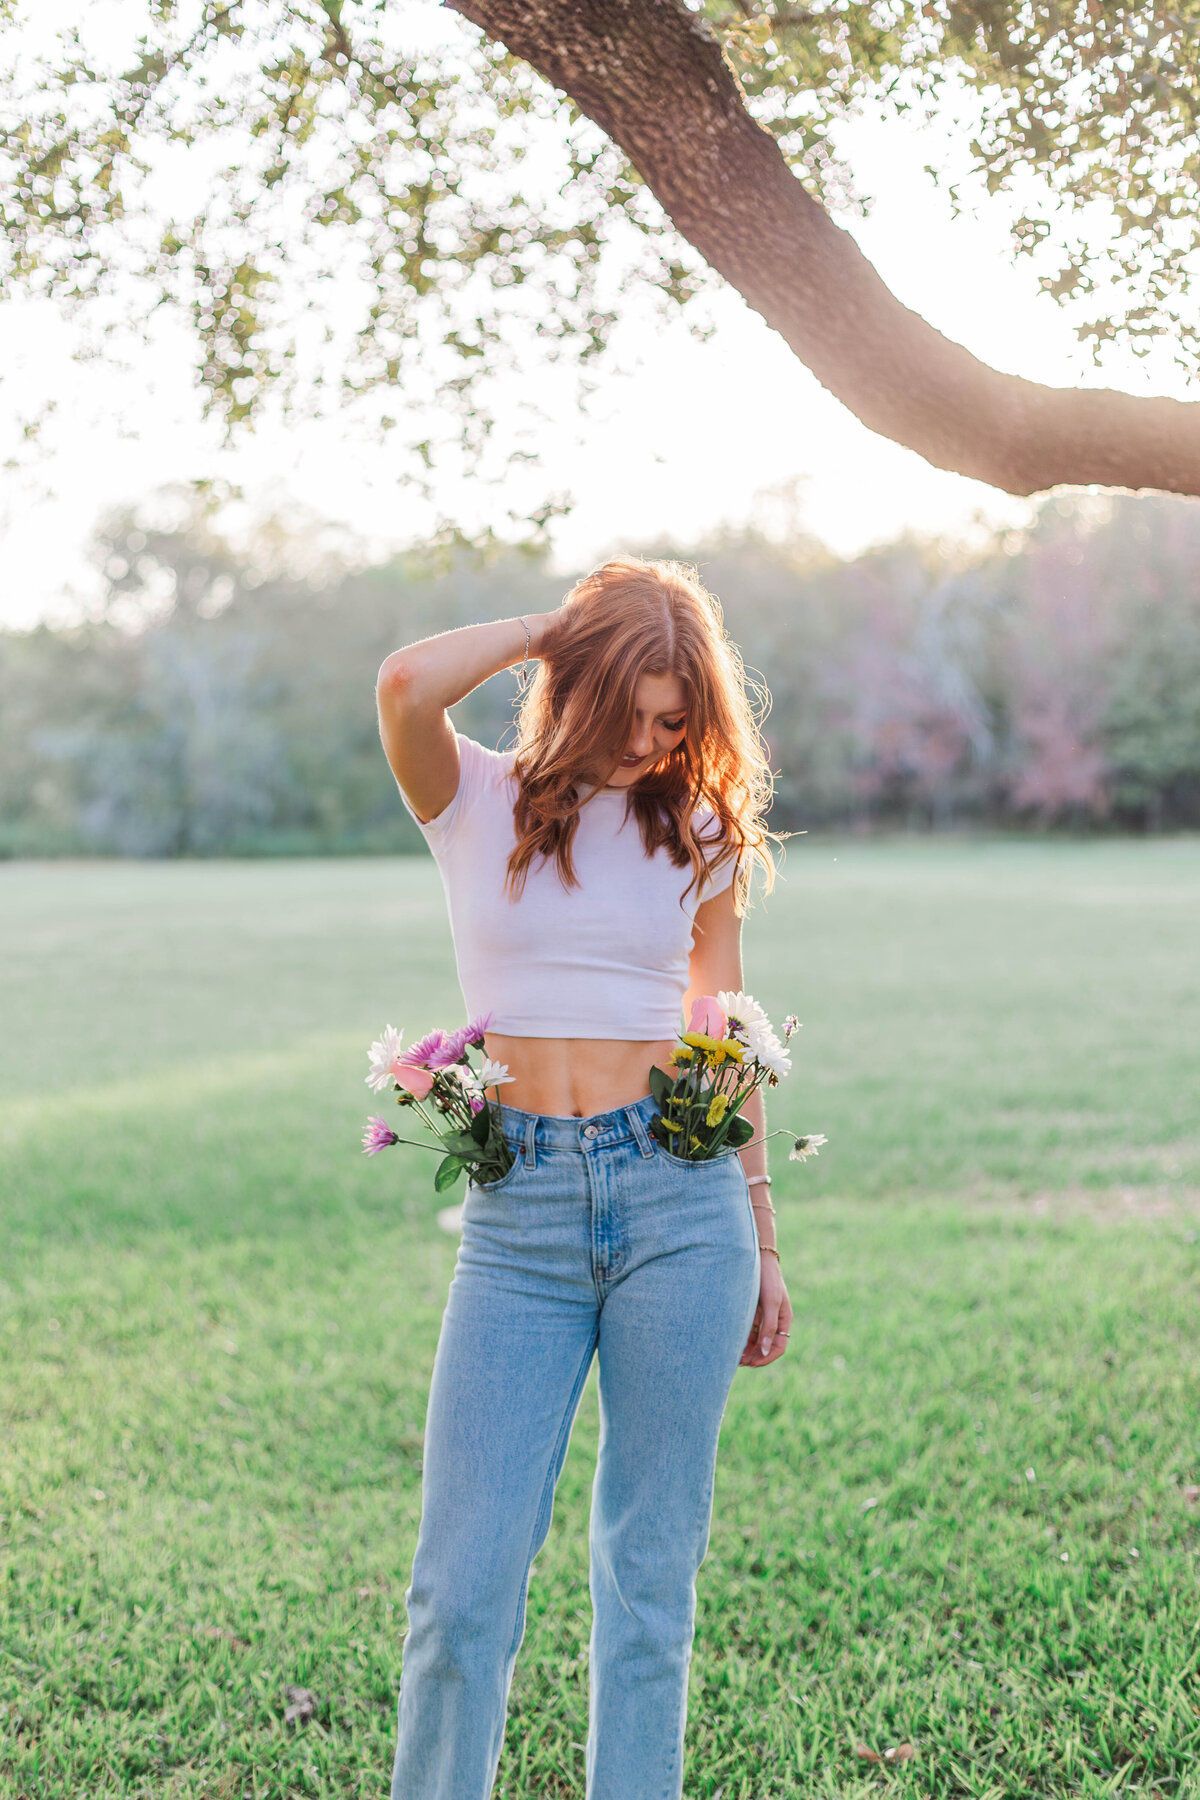 High school senior looks down at her feet with her hand in her hair while standing in a field with flowers coming out of her pockets